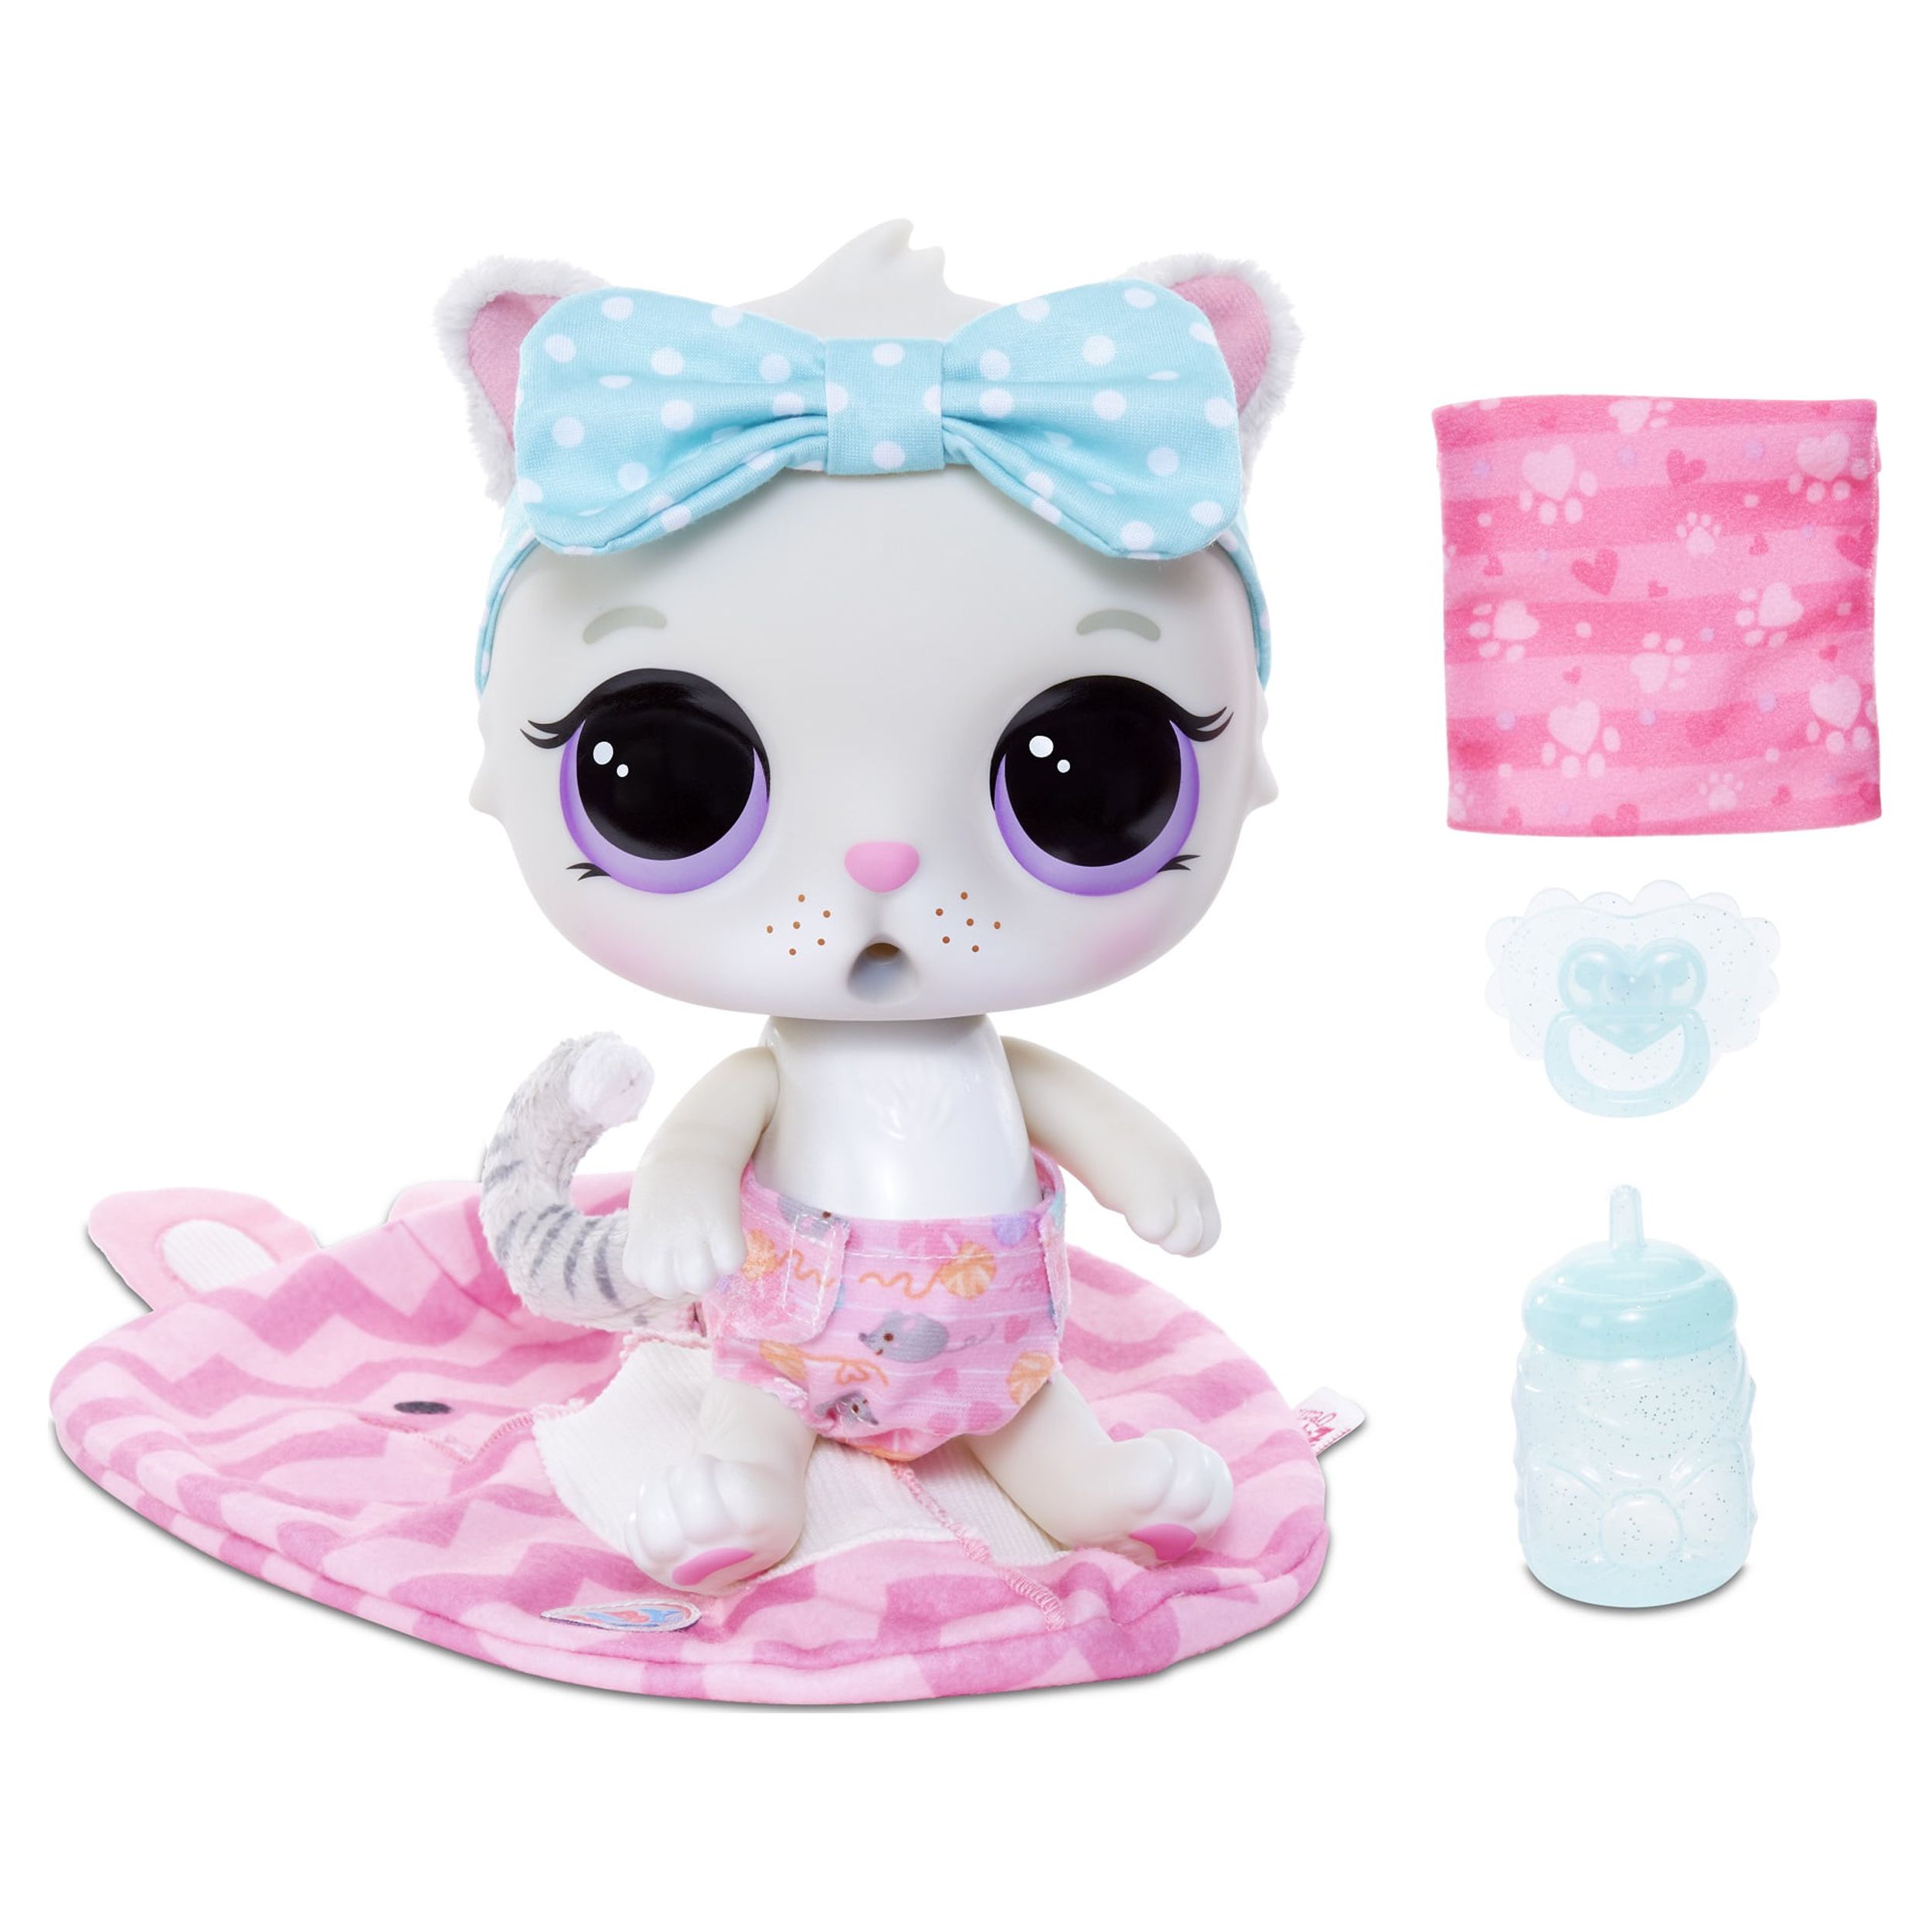 Baby Born 12" Surprise Cuddle Baby Pet Kitty Really Drinks & Pees Plush Toy - image 1 of 6